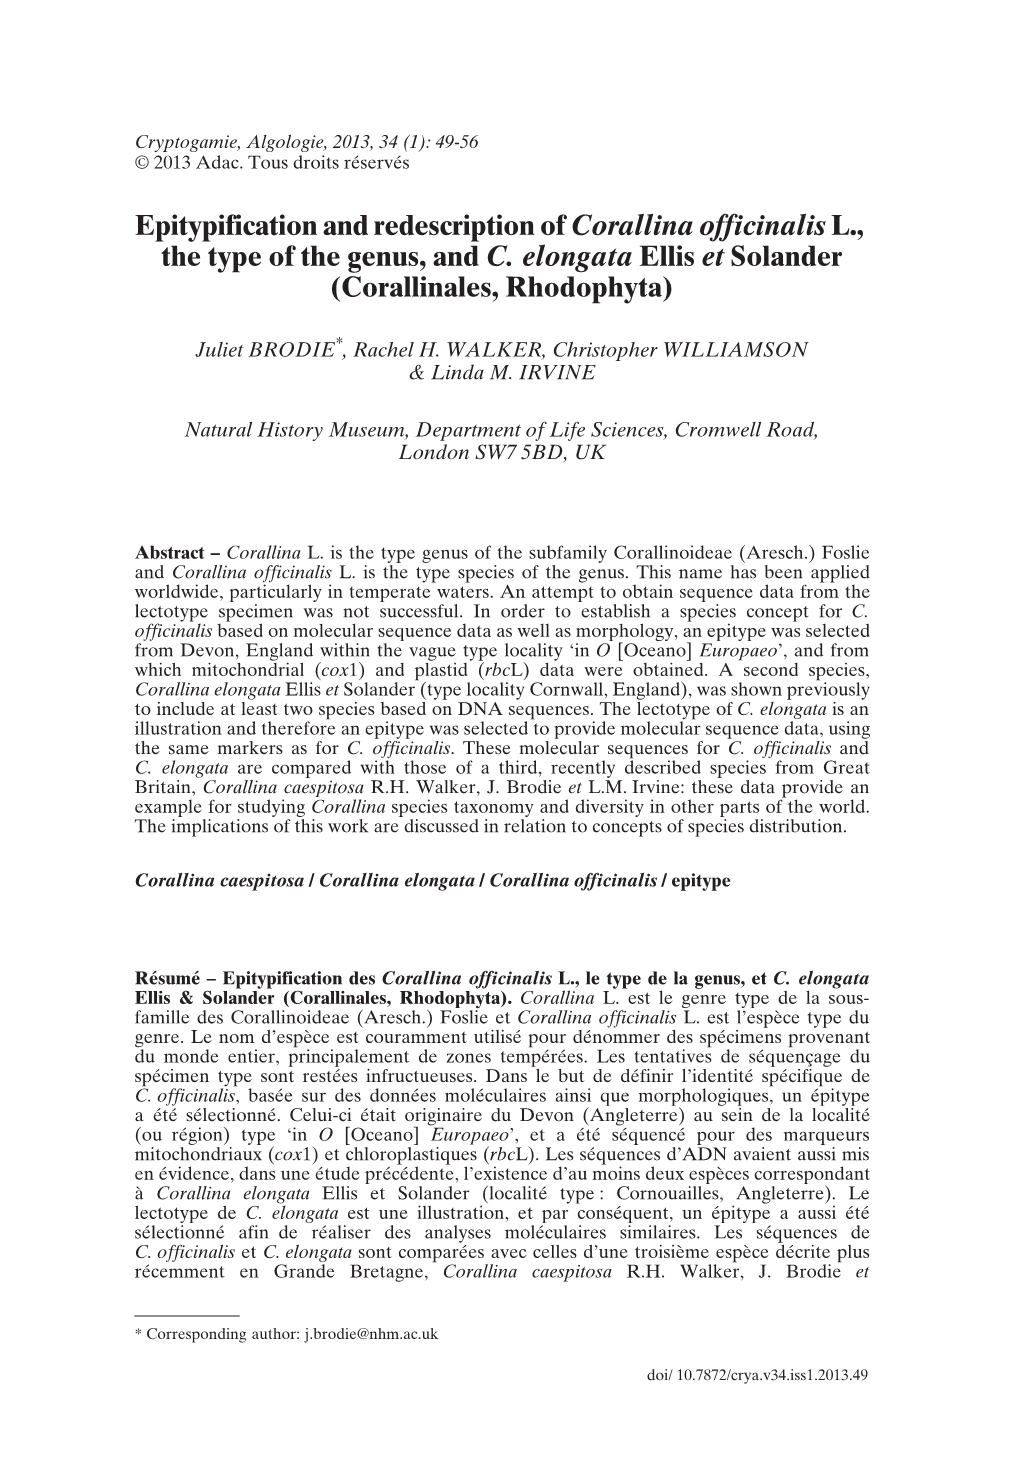 Epitypification and Redescription of Corallina Officinalis L., the Type of the Genus, and C